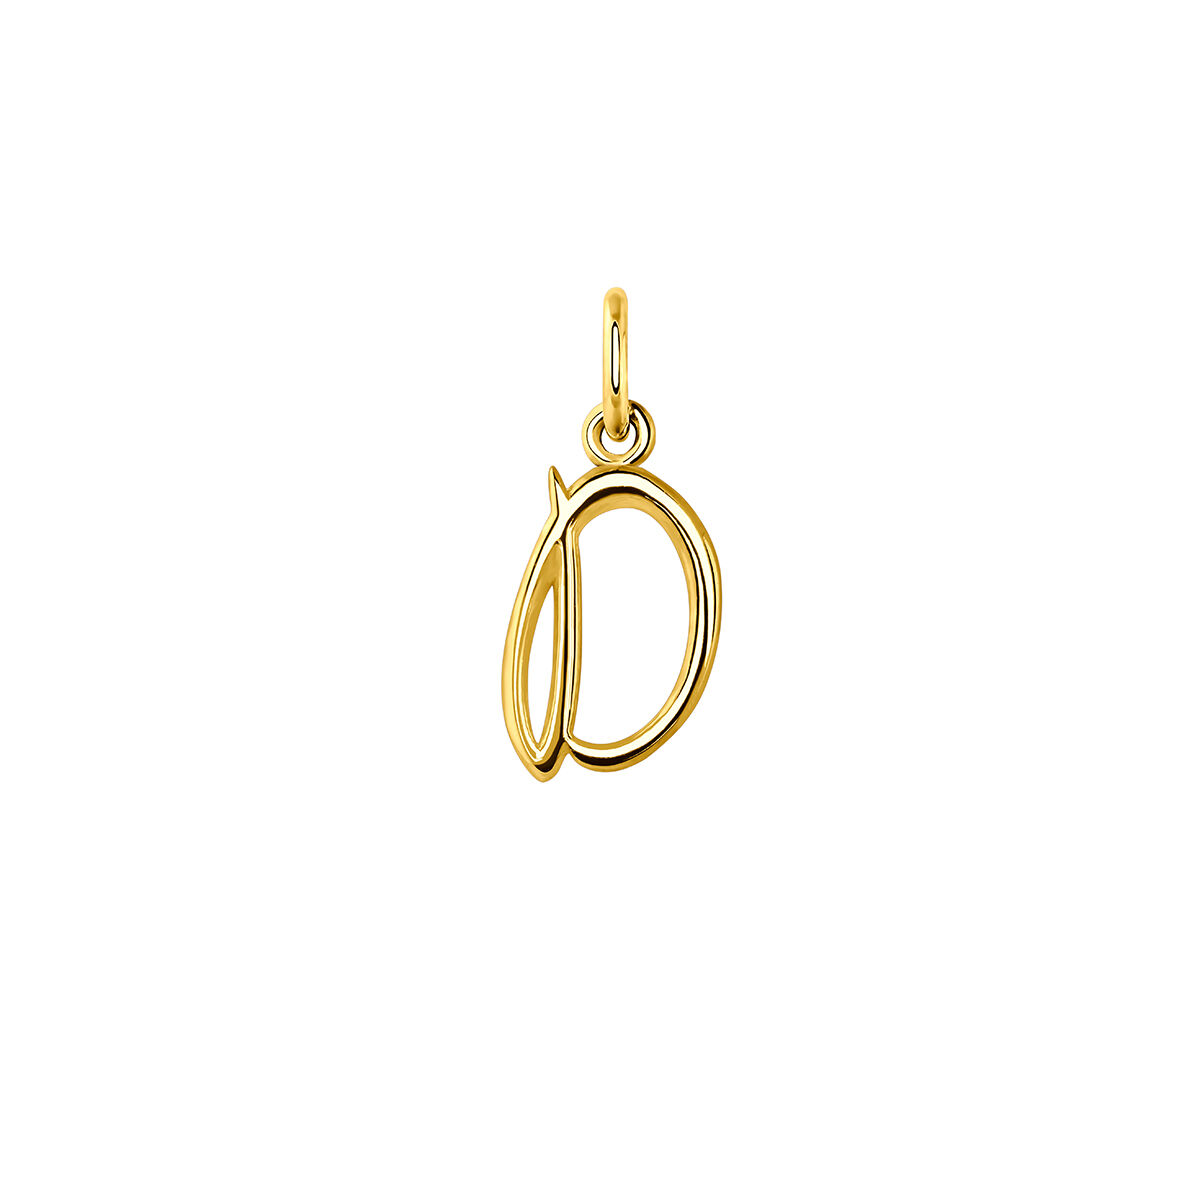 Gold-plated silver D initial charm  , J03932-02-D, hi-res